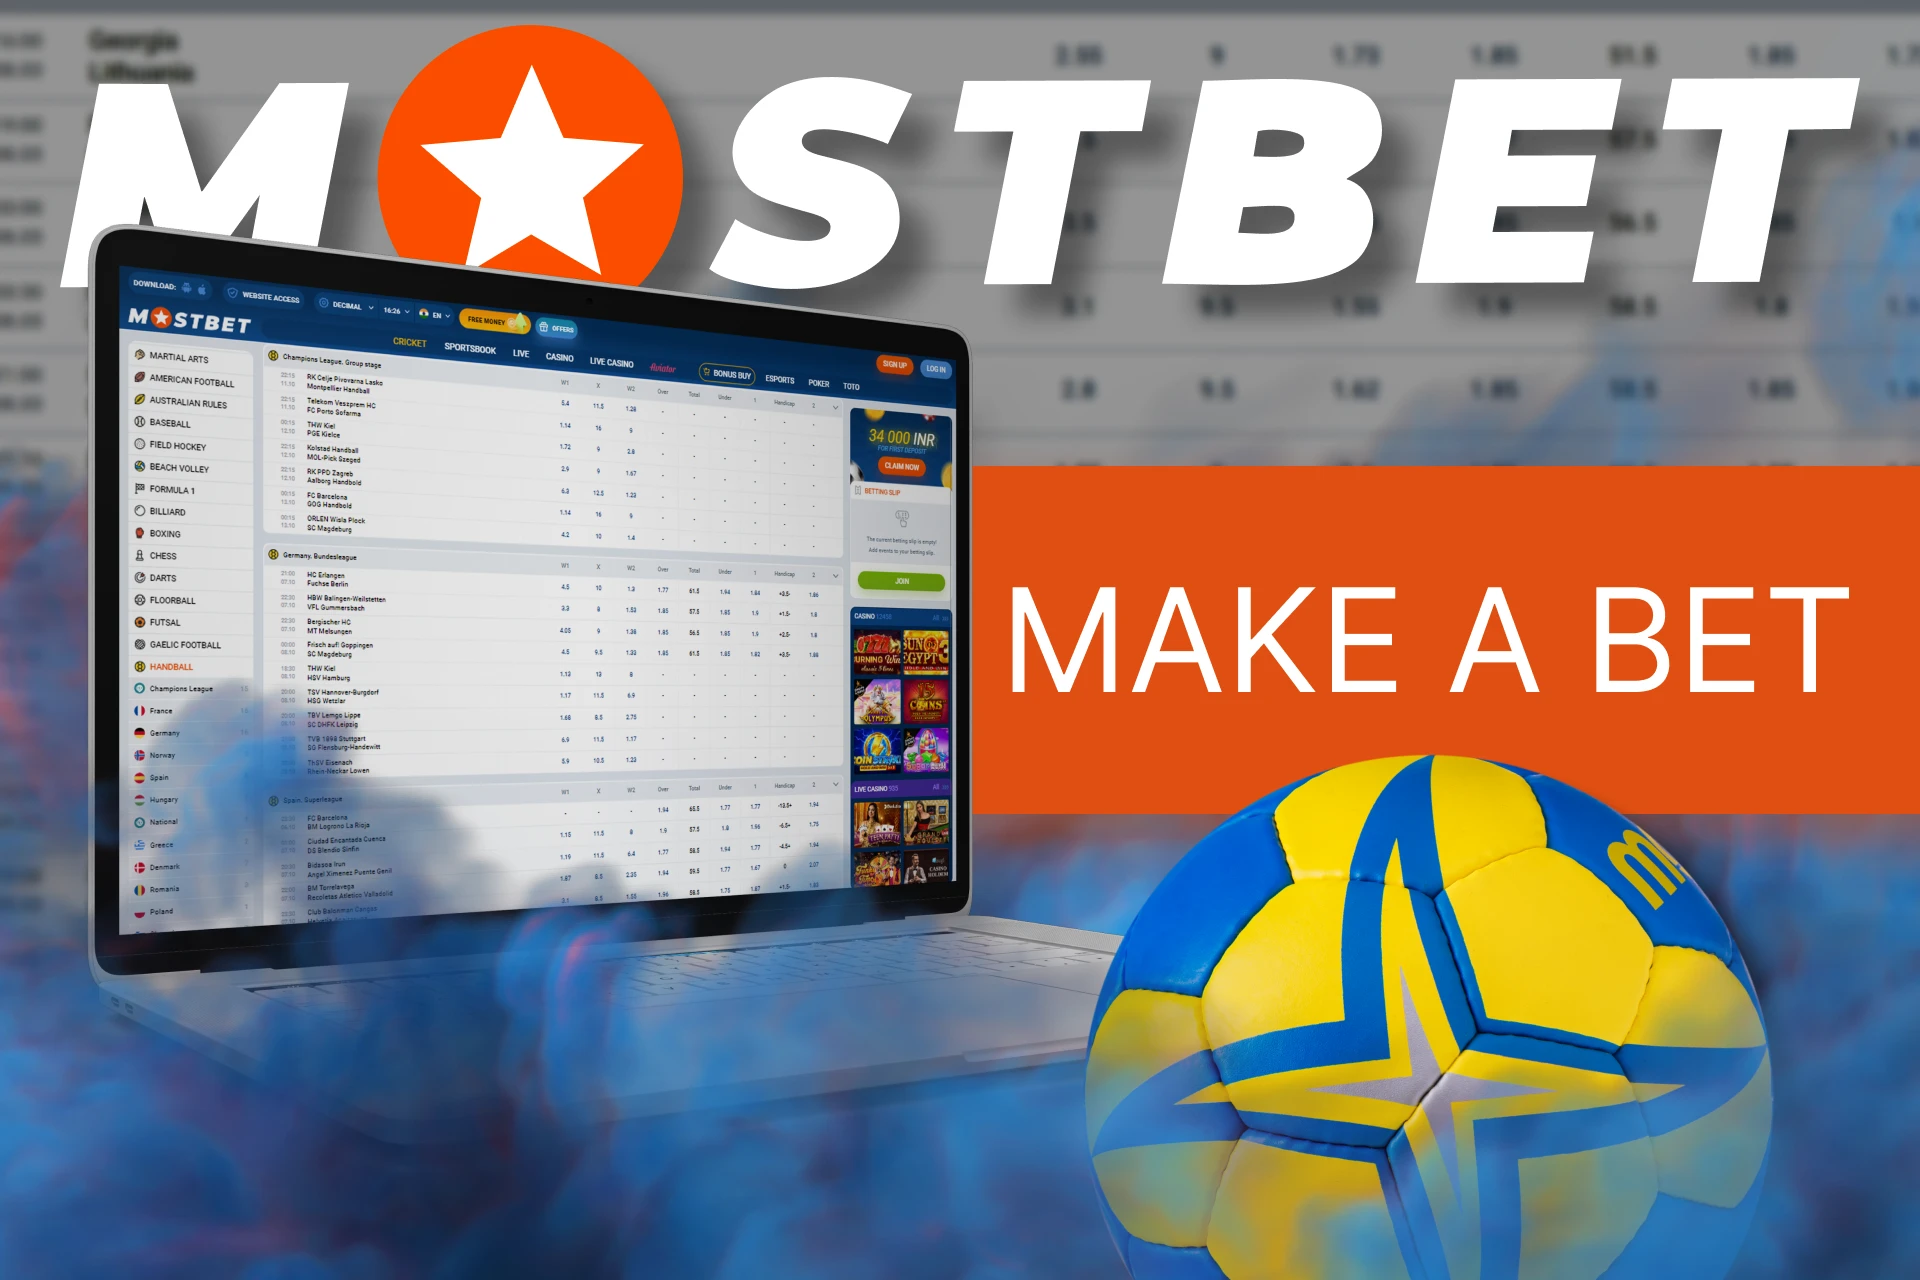 At Mostbet, place your handball bets online to make fast profits.